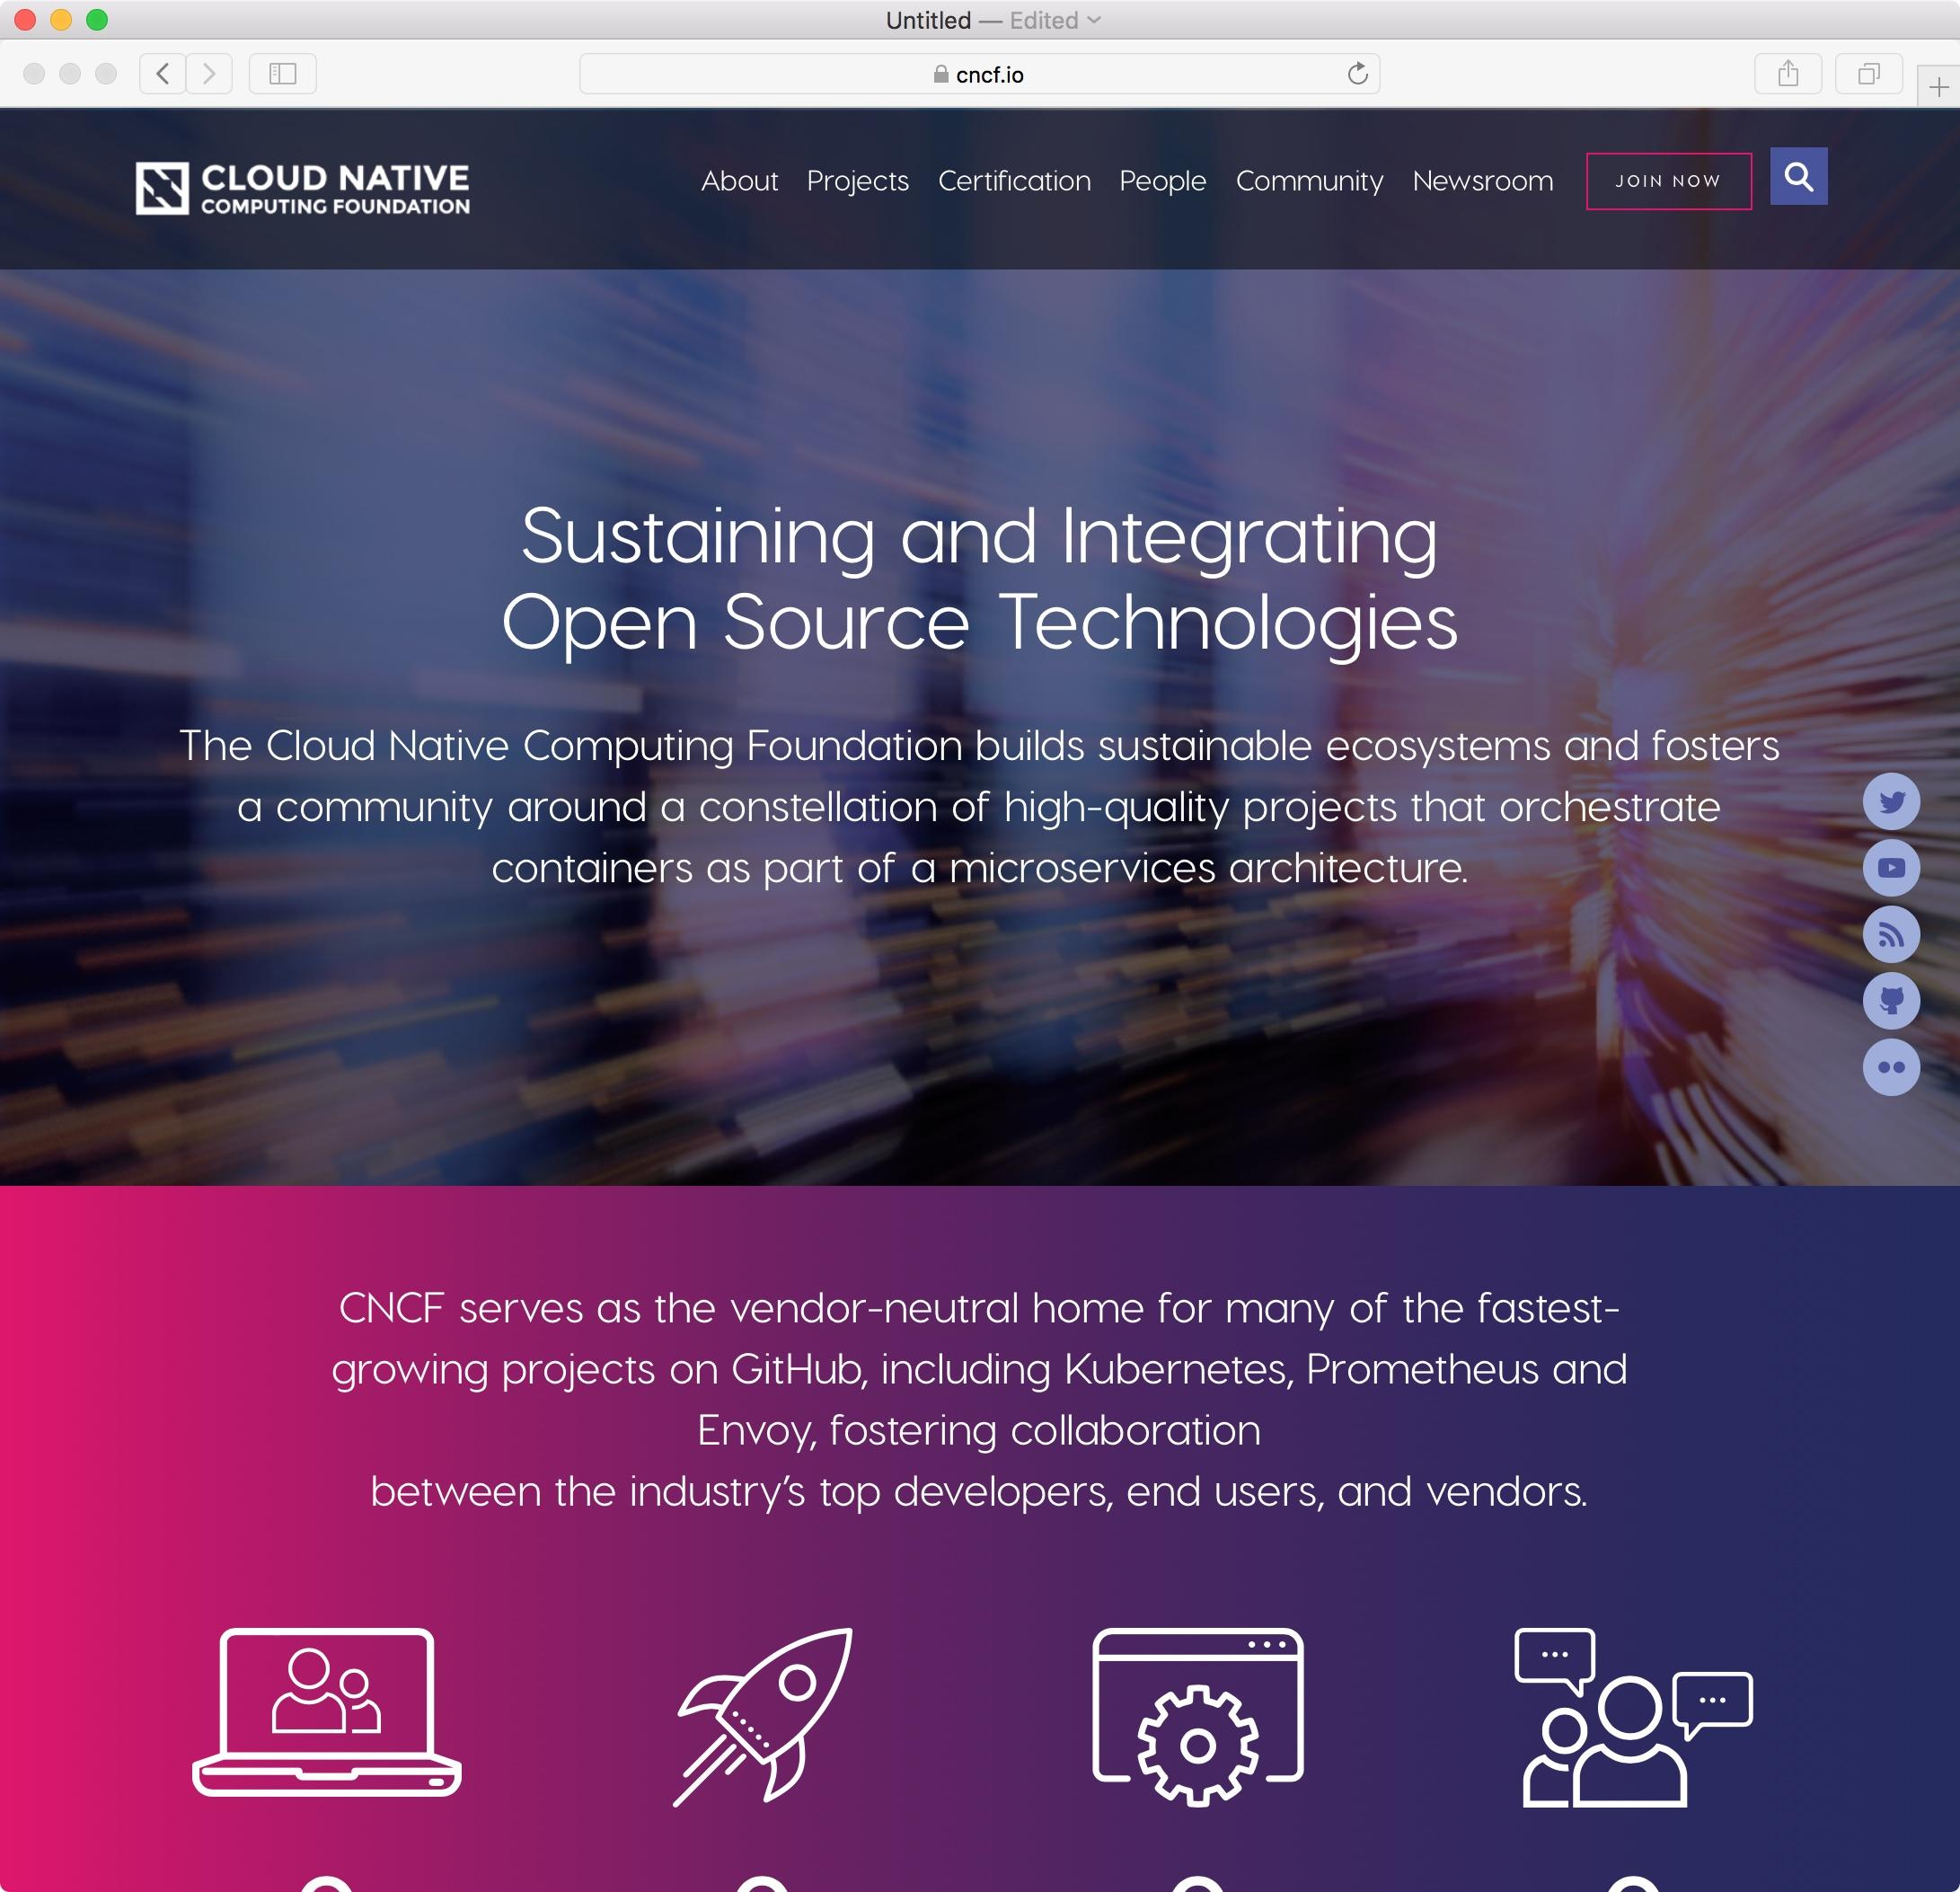 Cloud Native Computing Foundation website home page.